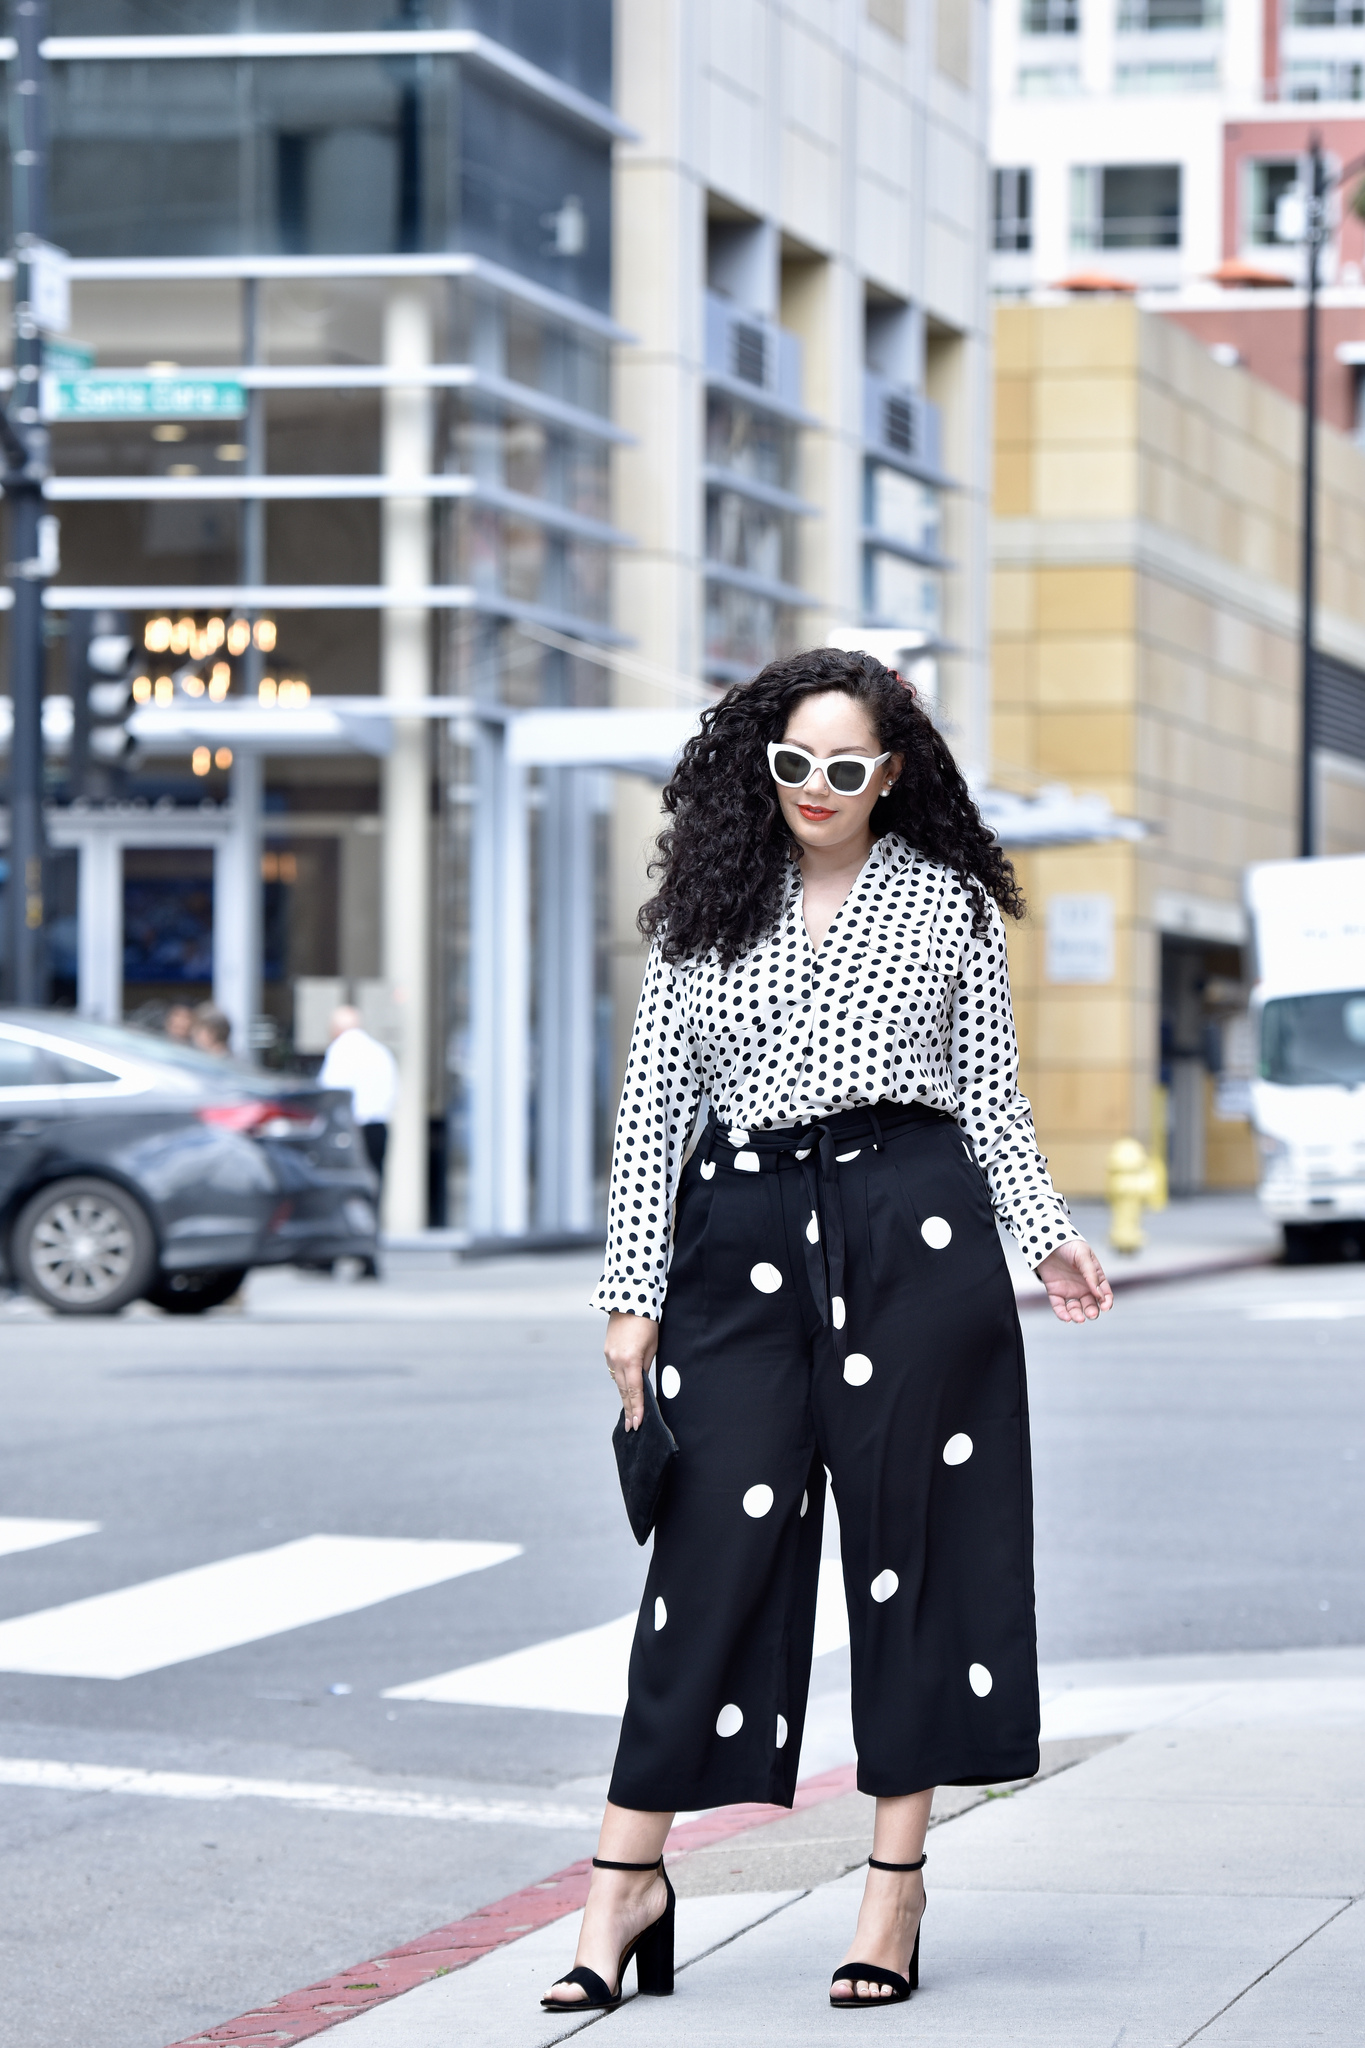 The Polkadot Pieces I'm Loving Right Now Via @GirlWithCurves #outfits #style #fashion #plussize #anntaylor